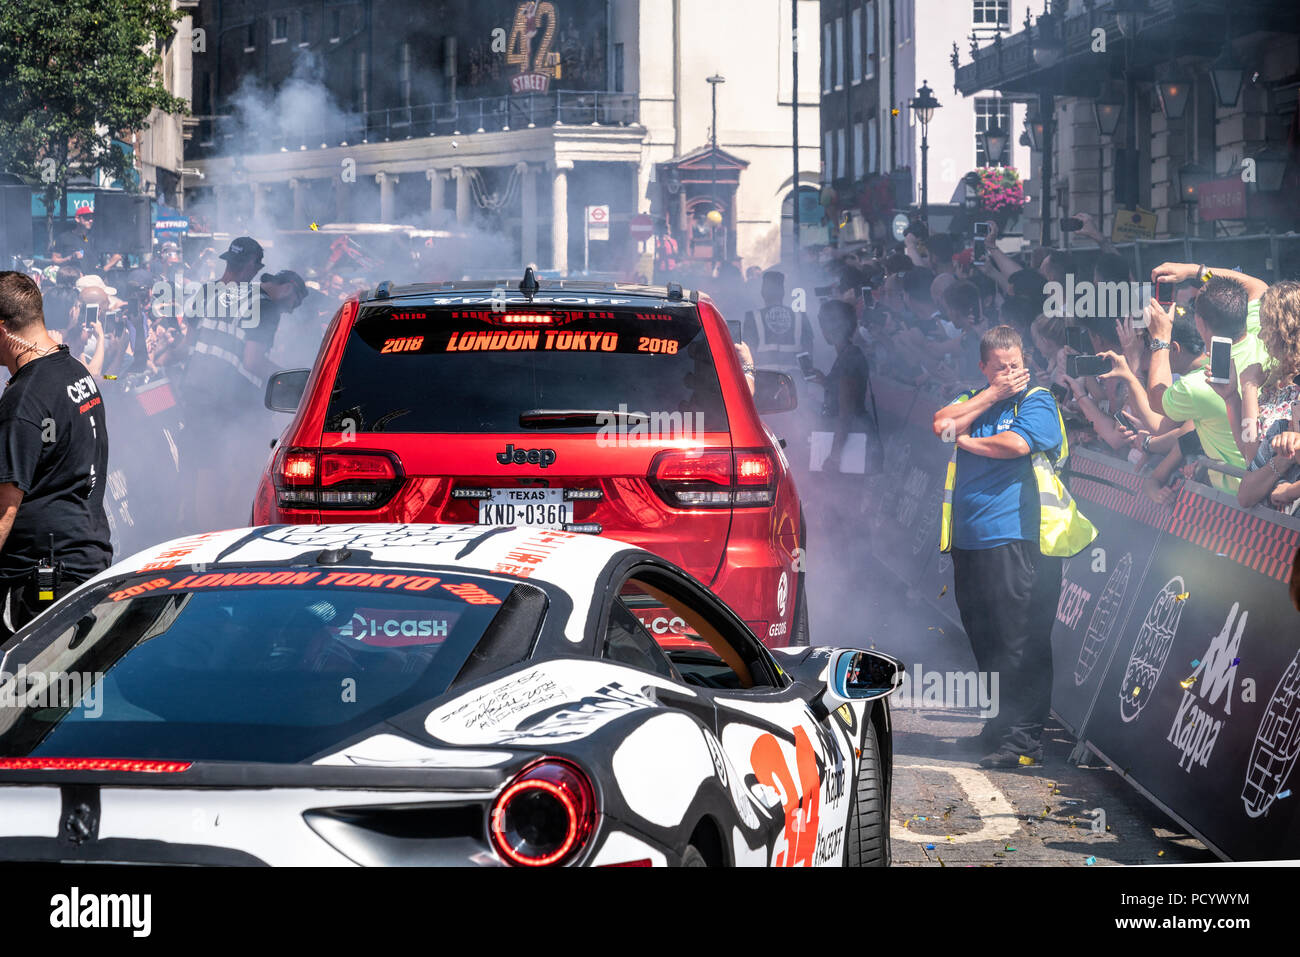 5 Aug 2018 - London, UK. A steward covering nose from smoke. Powerful supercars burning tires at charity race, Gumball Rally 3000. Stock Photo